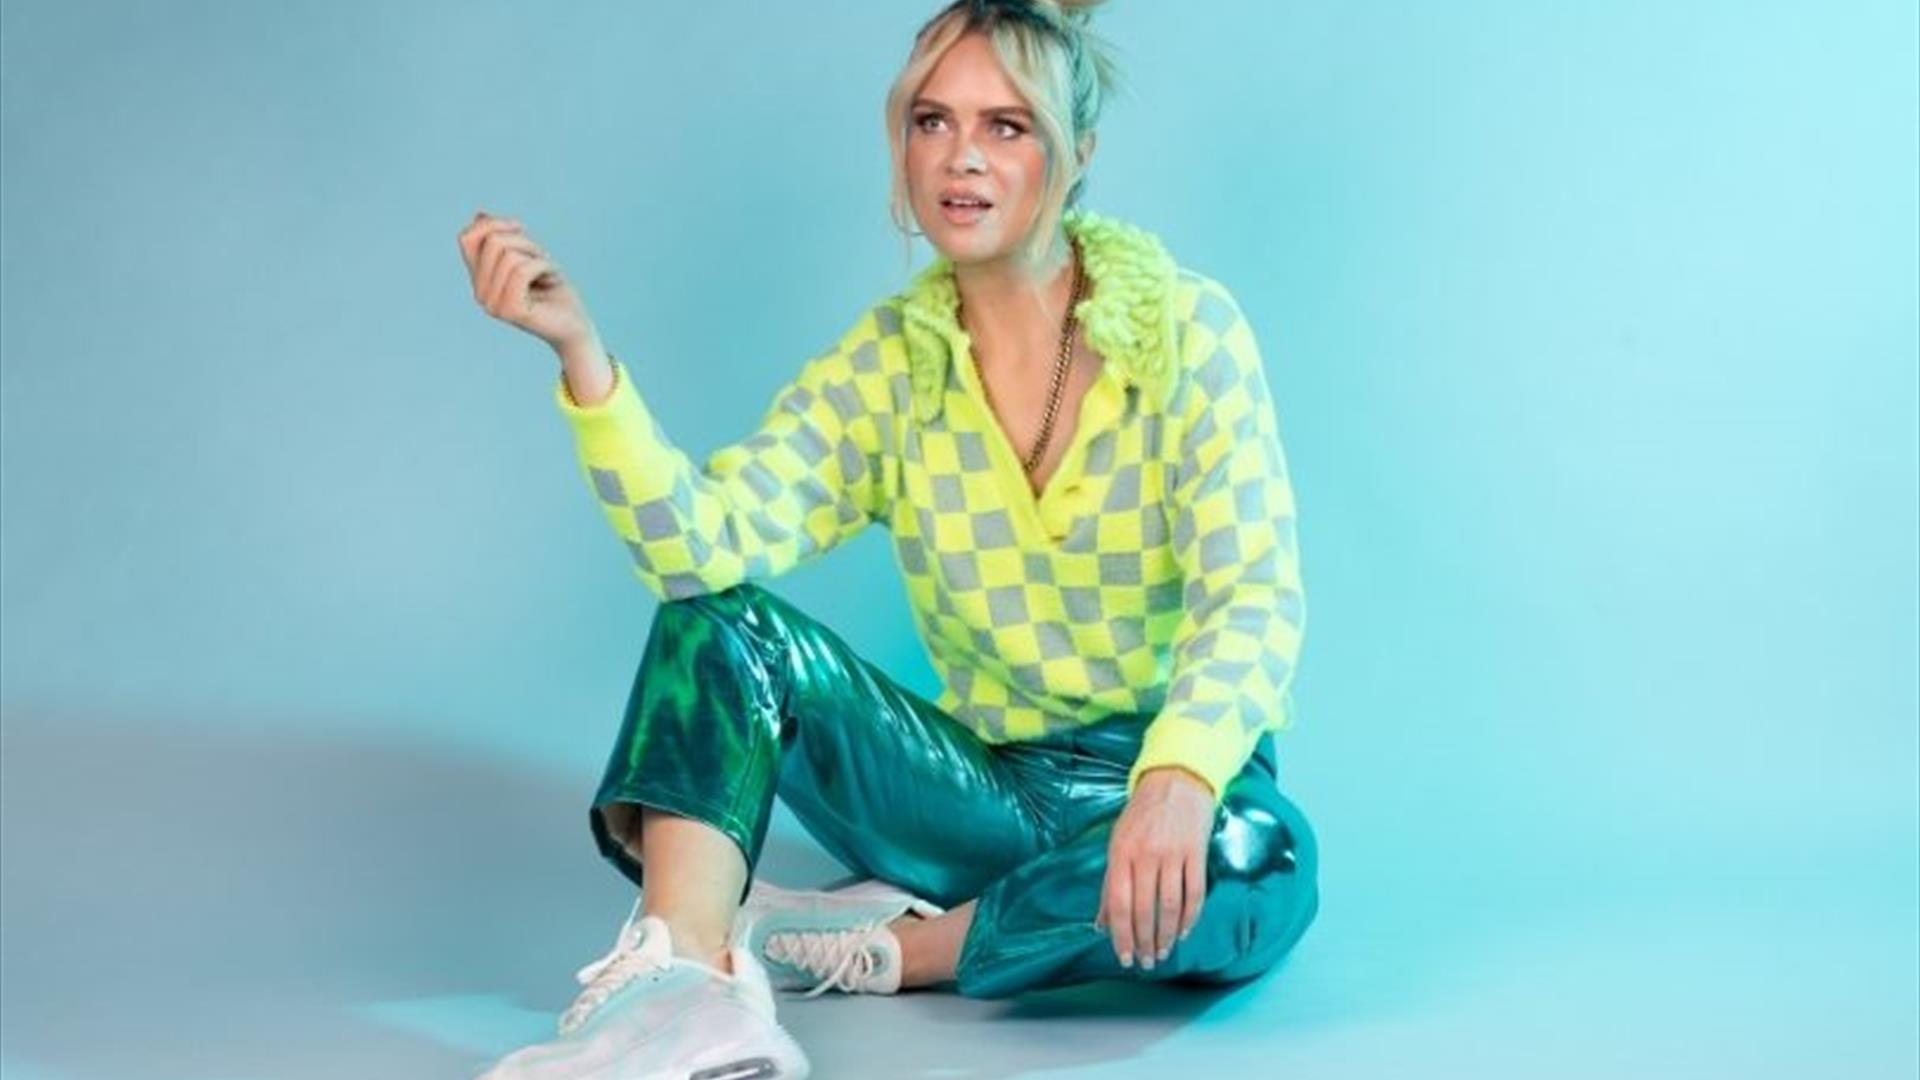 Joanne sitting casually on the floor in a bright yellow and turquoise outfit, against a cool green/blue background.